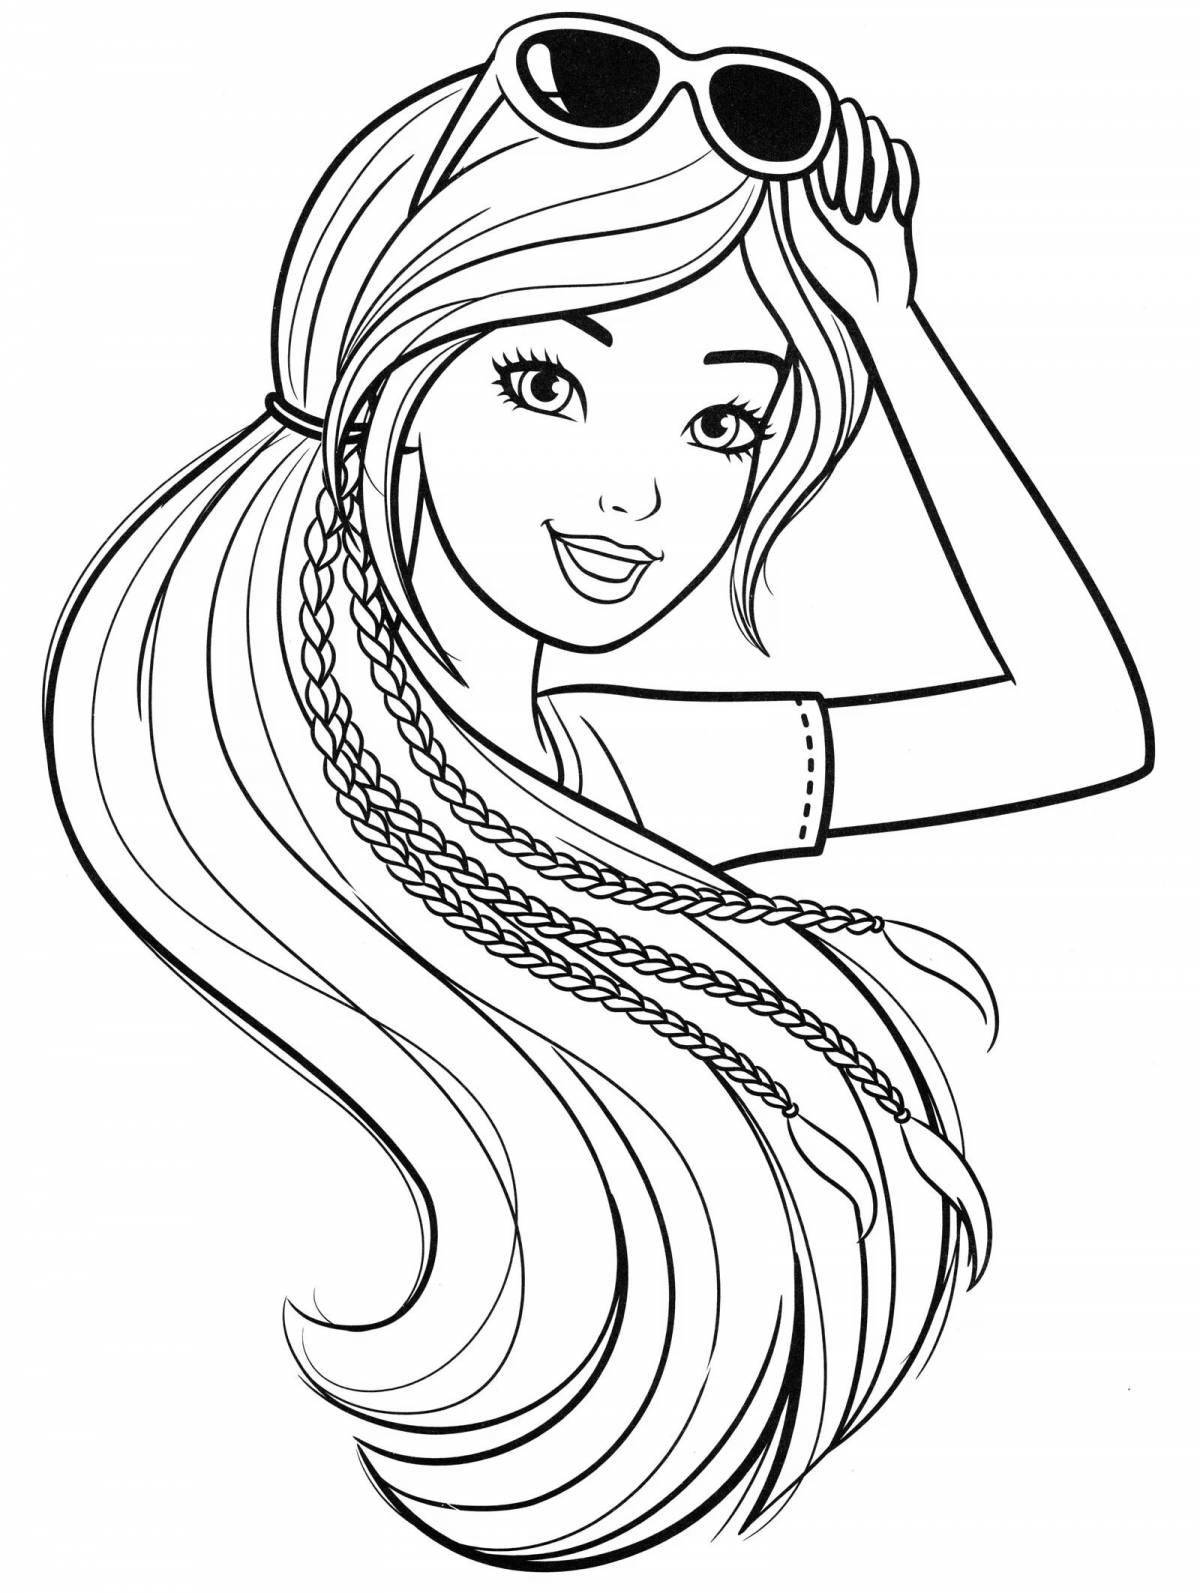 Exciting barbie coloring page